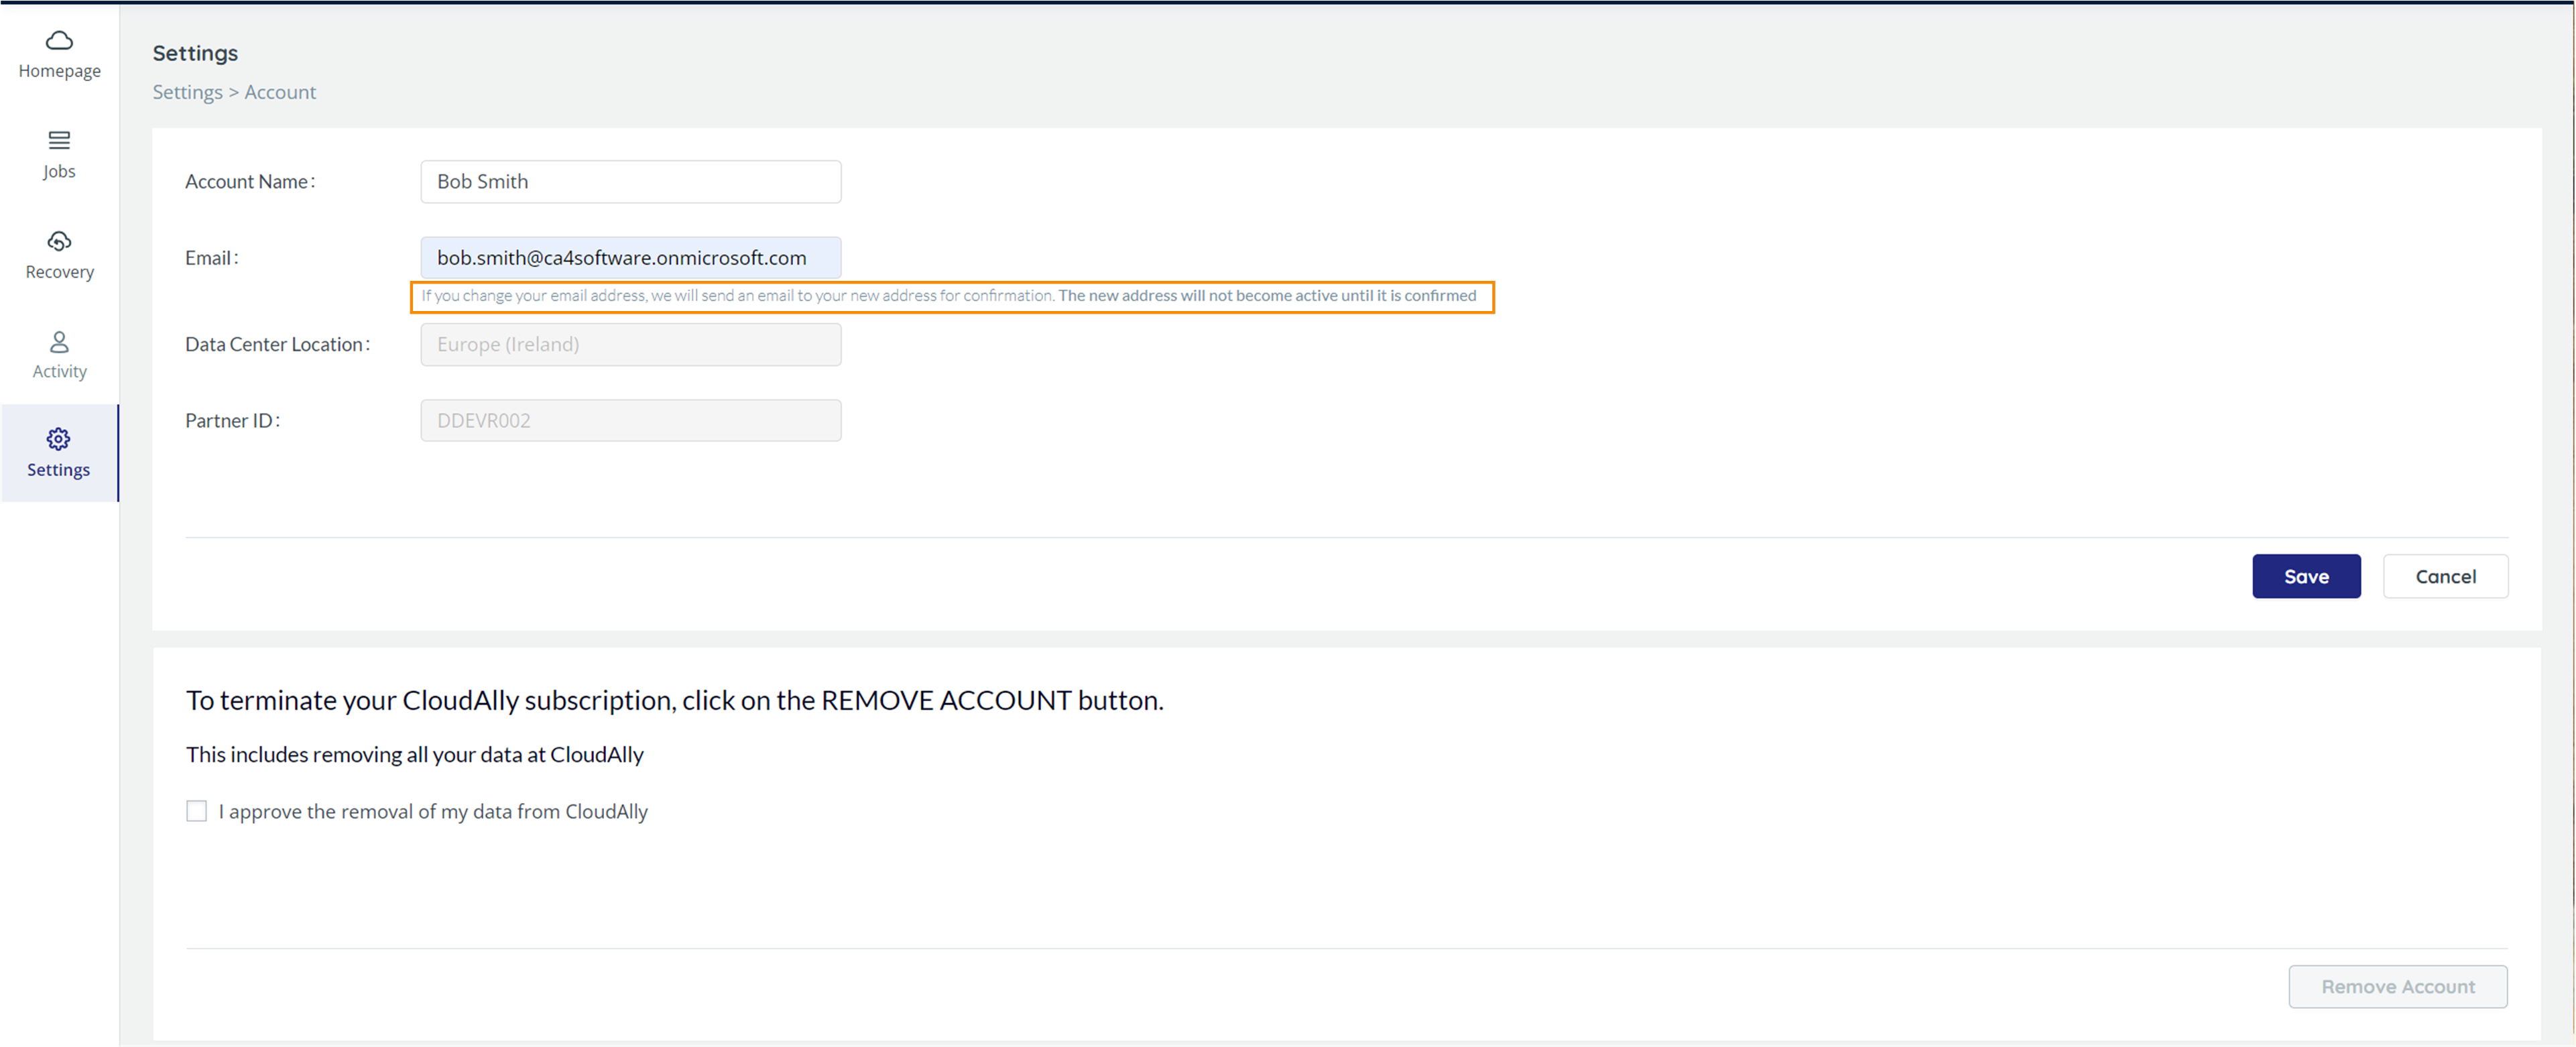 Account settings, highlighting message that account changes will not take effect until user confirms.